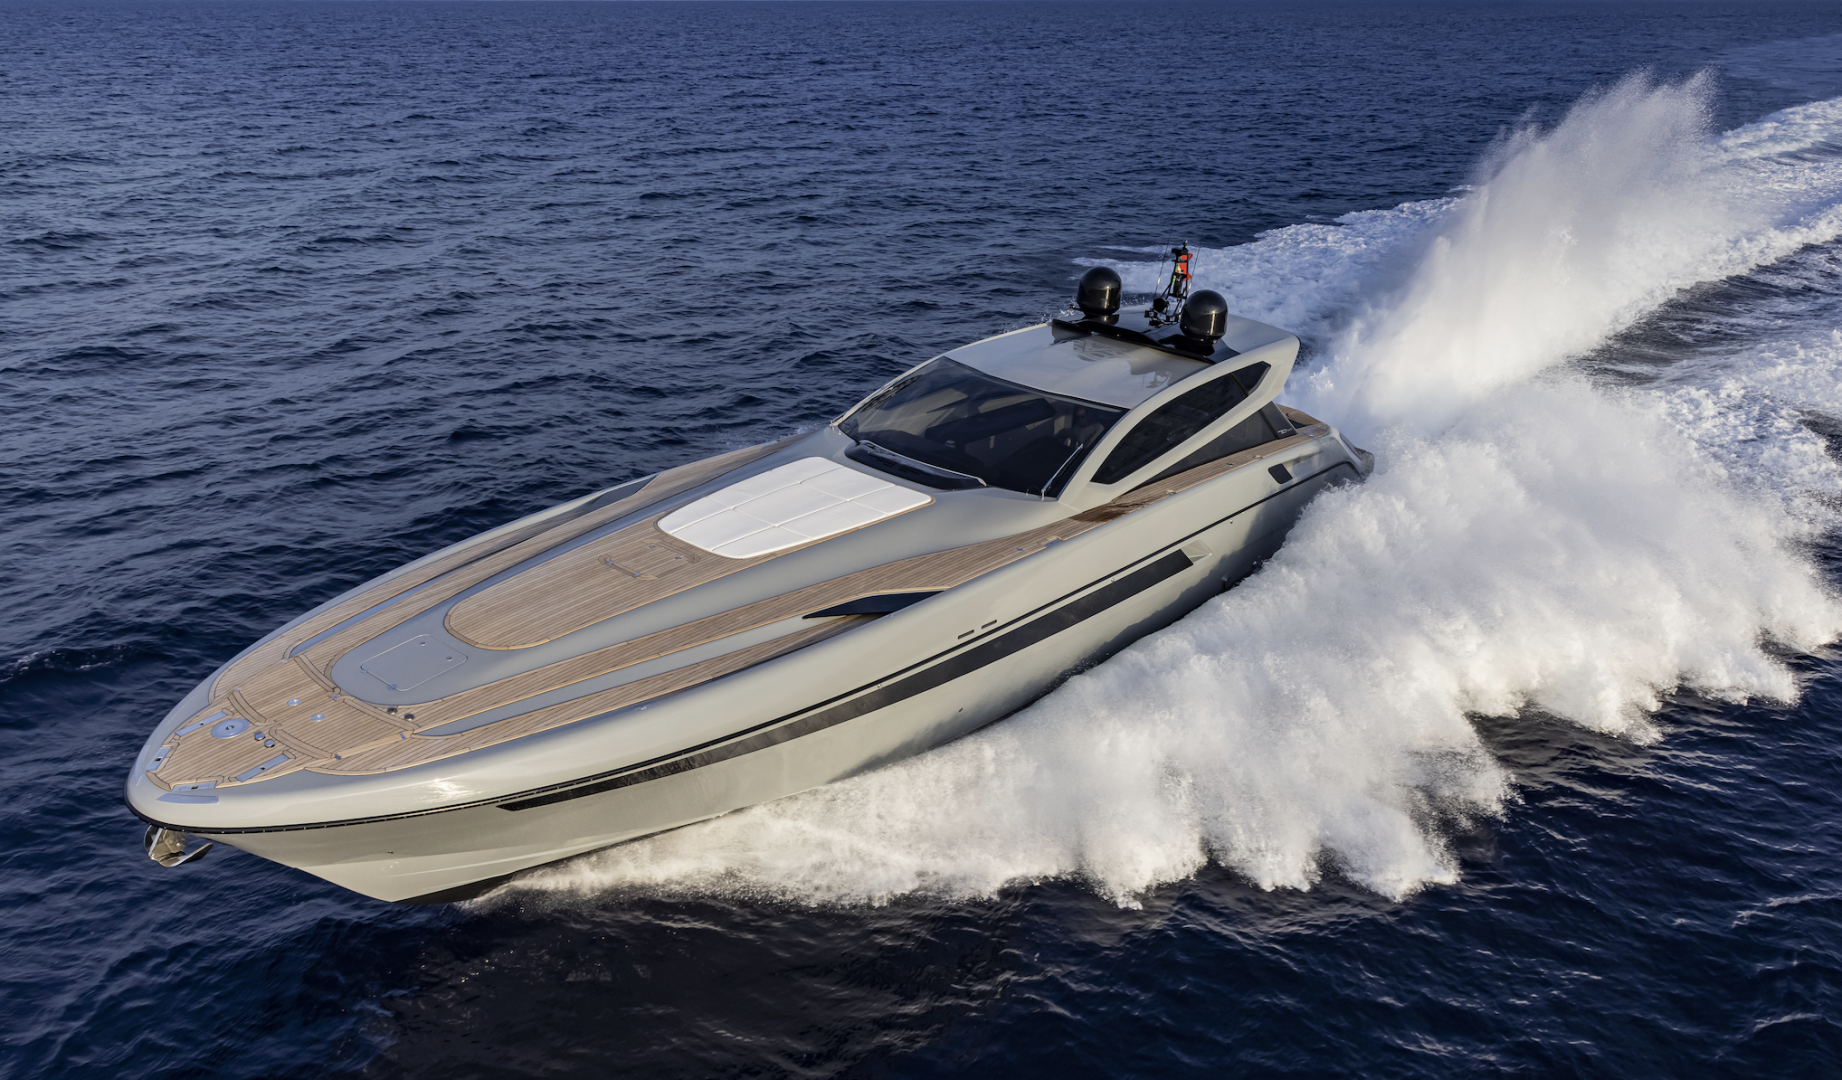 The new iconic Otam 70HT made its World debut at Cannes Yachting Festival 2021